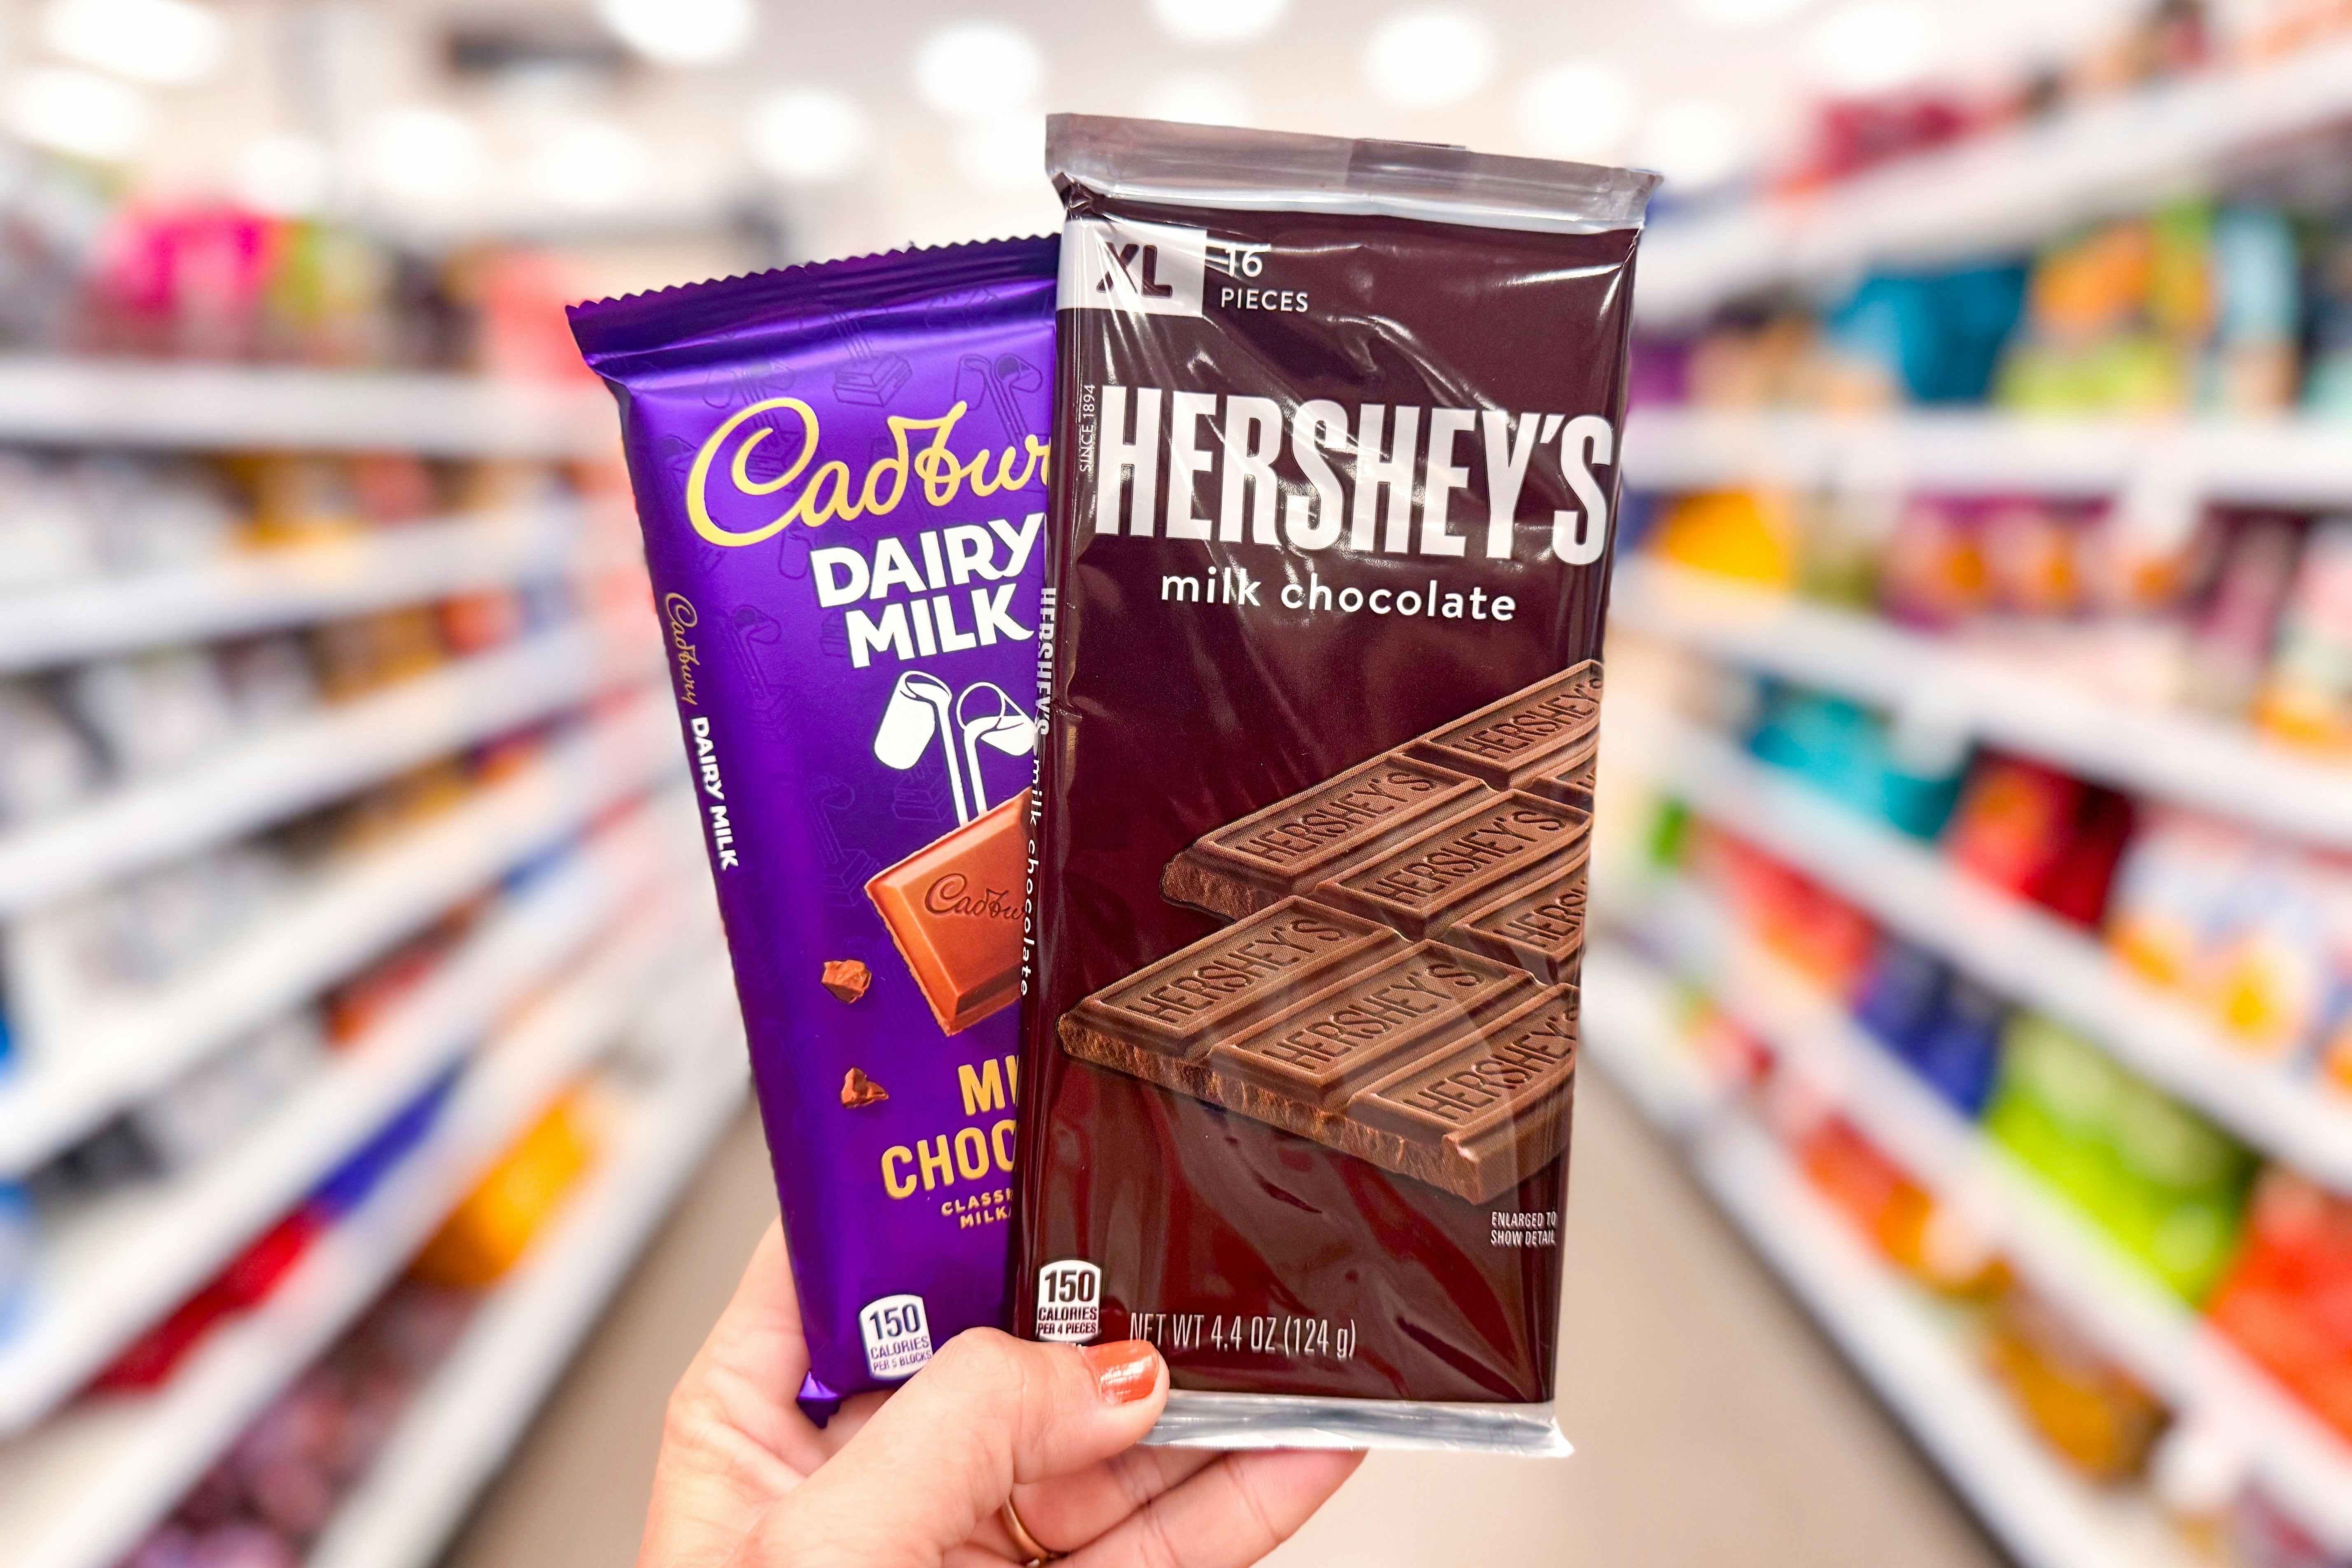 Hurry — Candy Bars, as Low as $0.18 at Target (Online and in Stores)